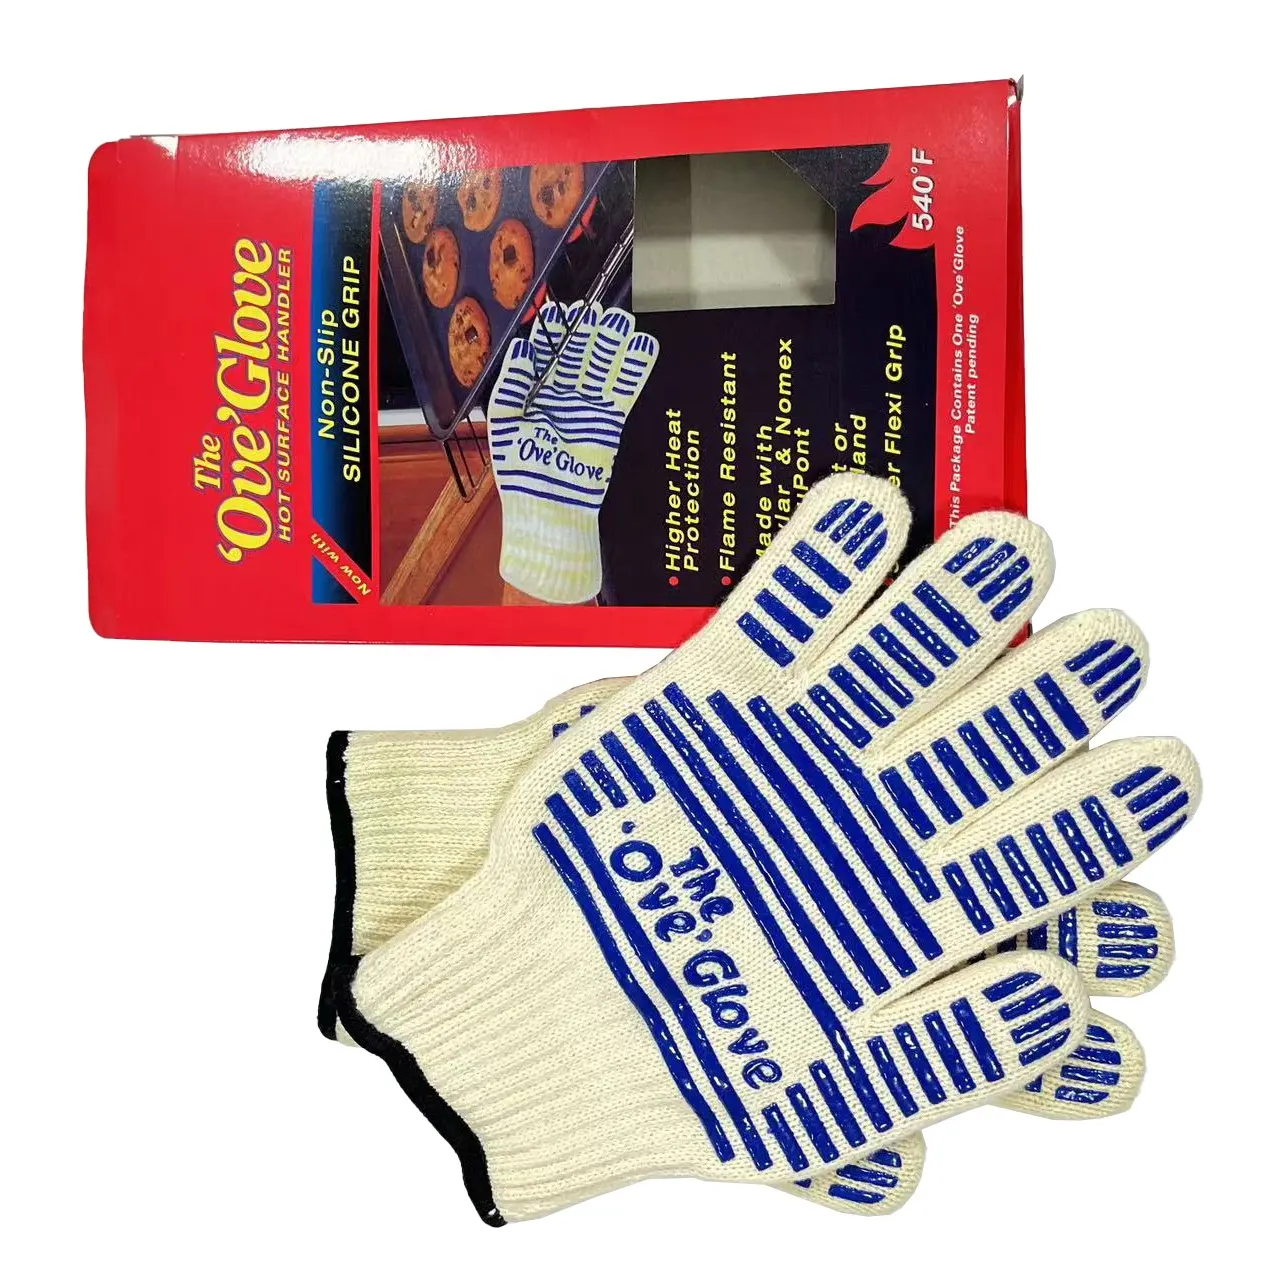 Meita Home Kitchen Baking Polyester Cotton Silicone Barbecue Grill Heat Resistant Bbq sublimation Oven Gloves cotton lining